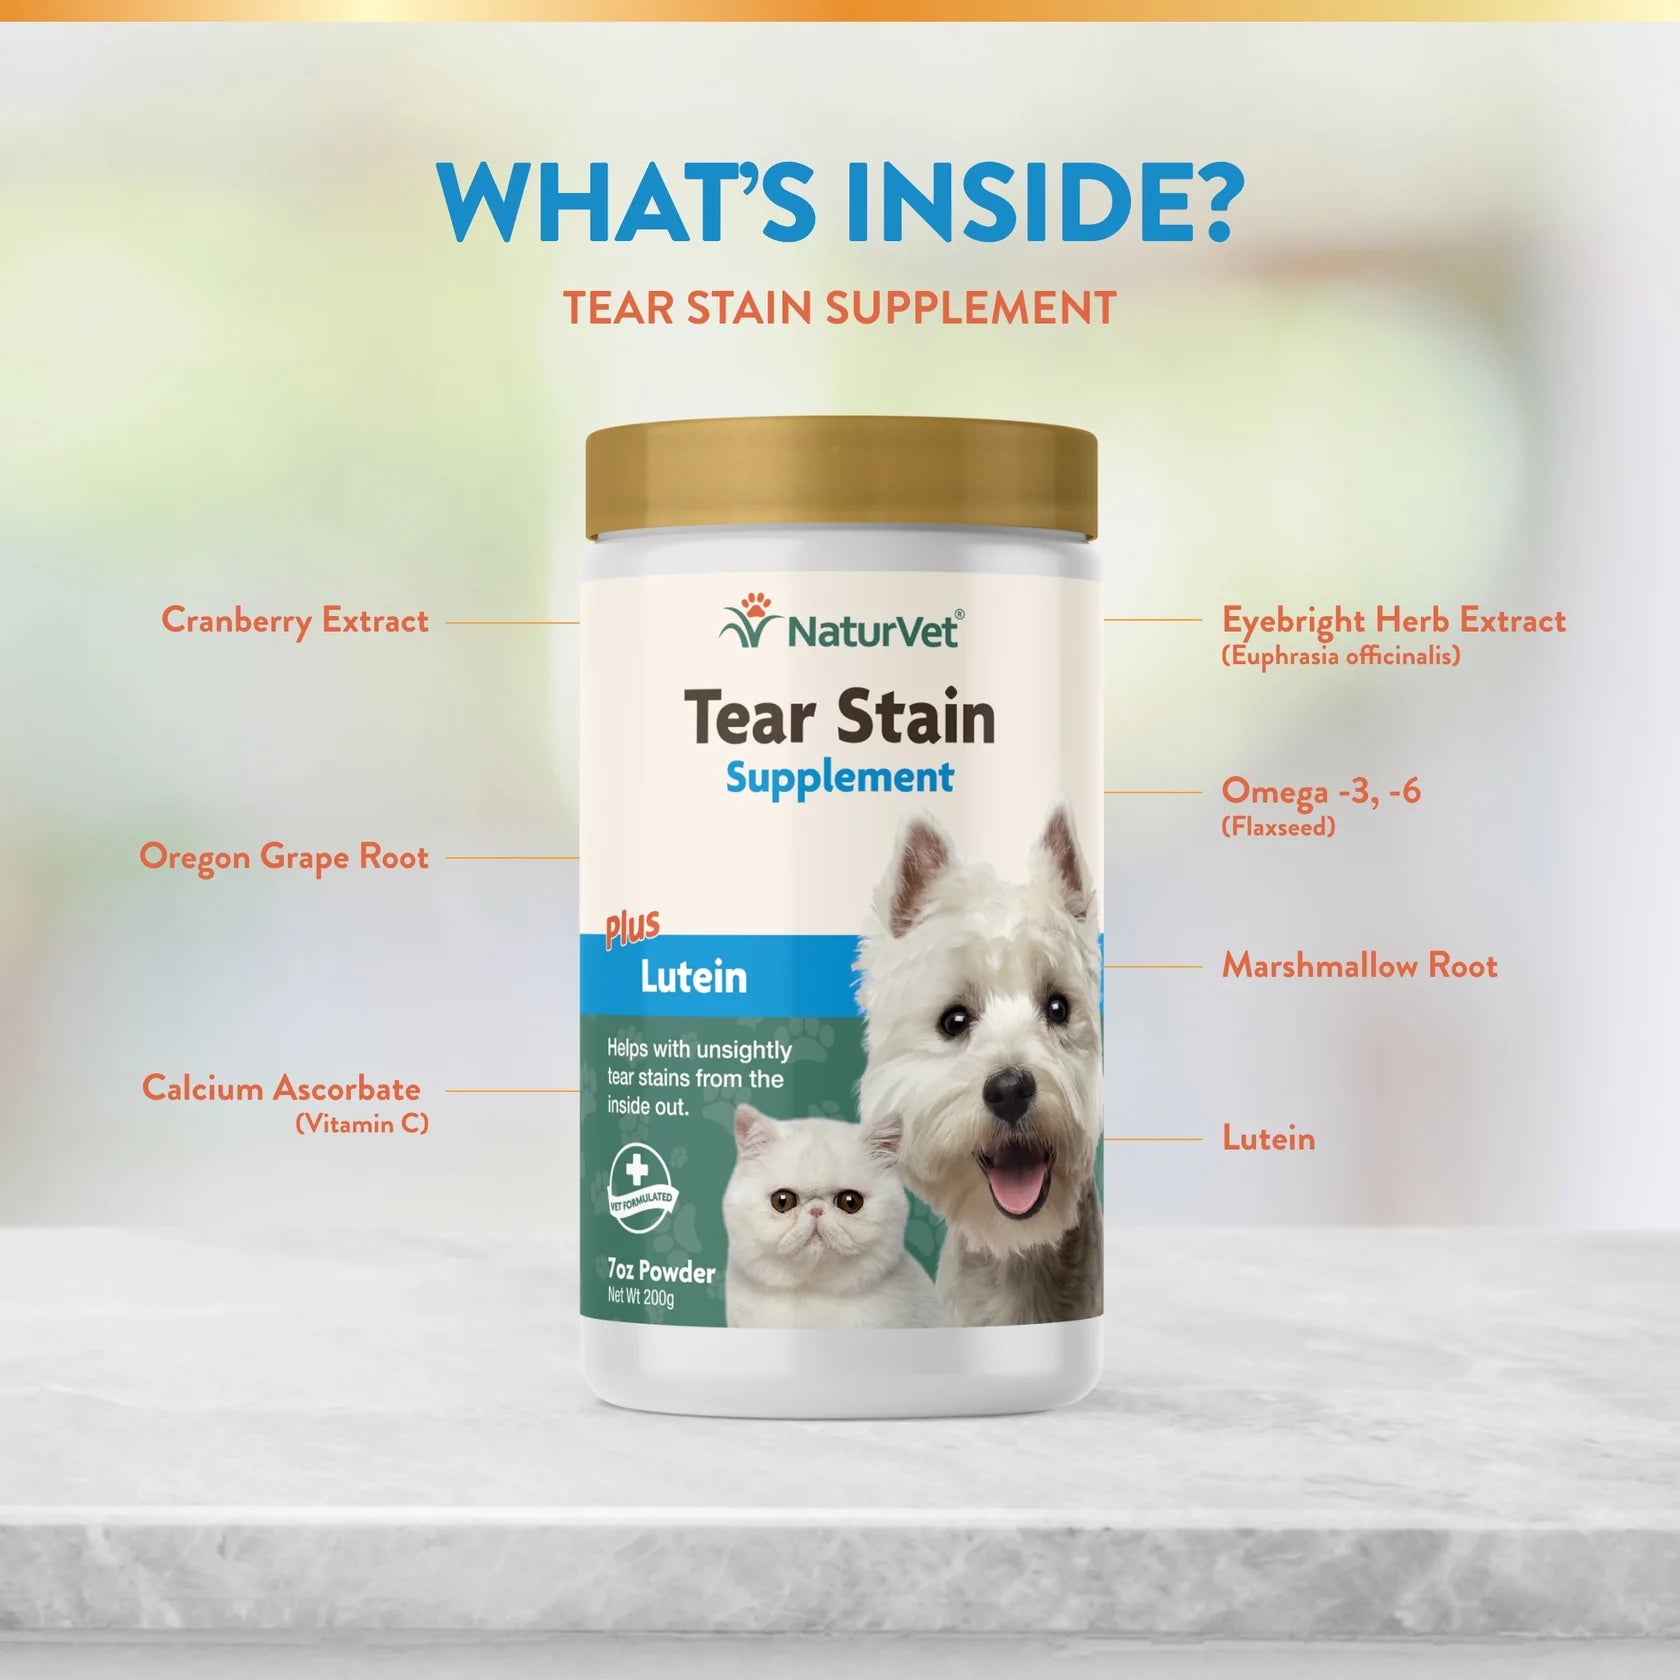 TEAR STAIN SUPPLEMENT